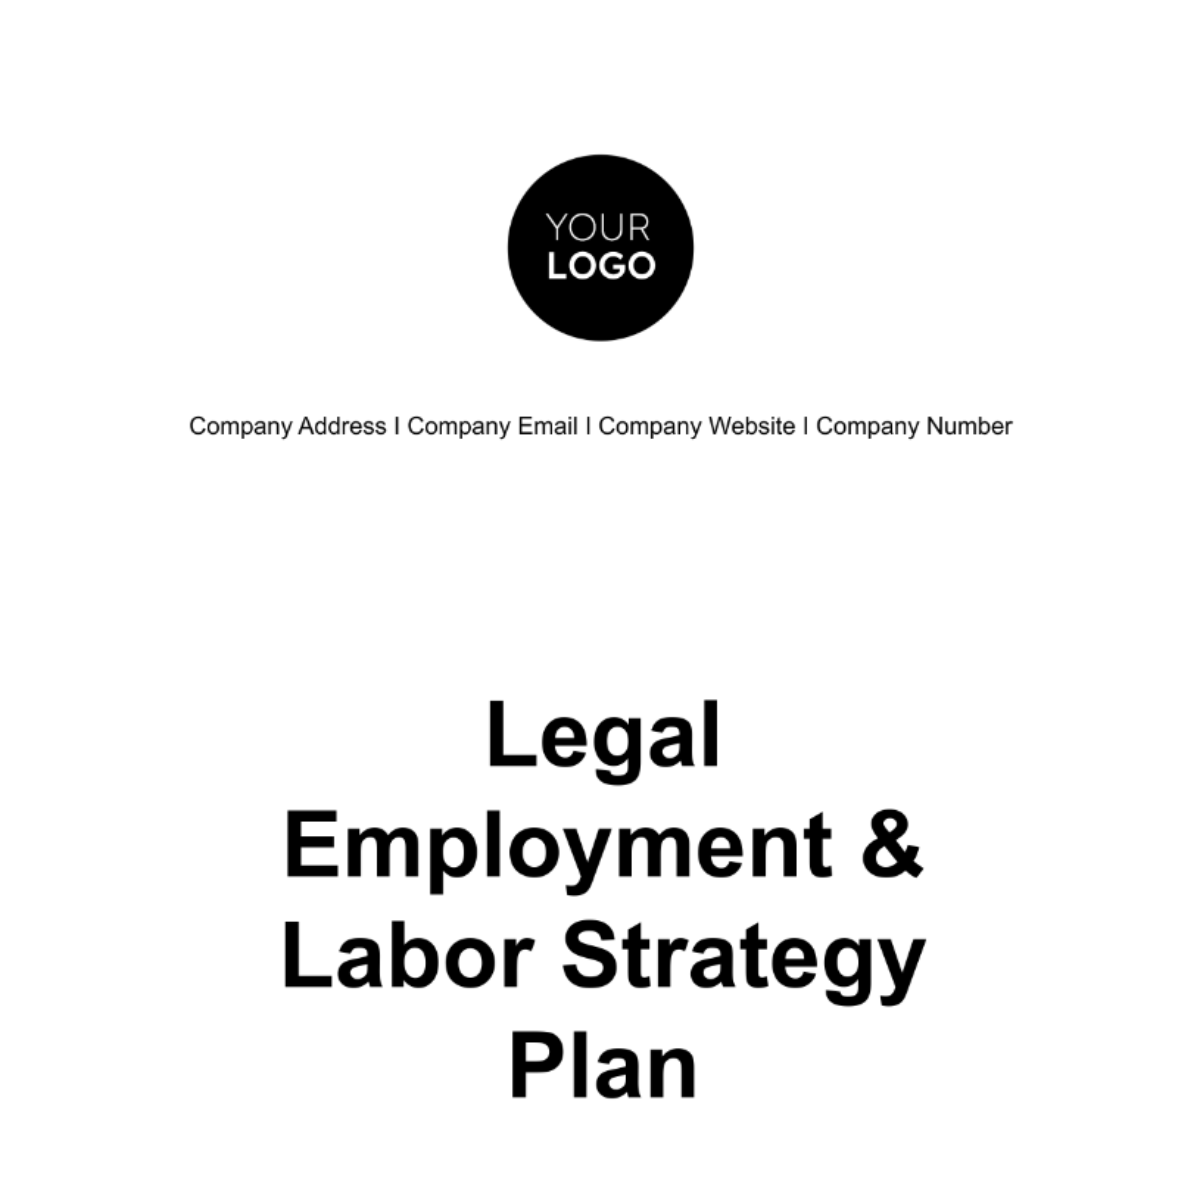 Legal Employment & Labor Strategy Plan Template